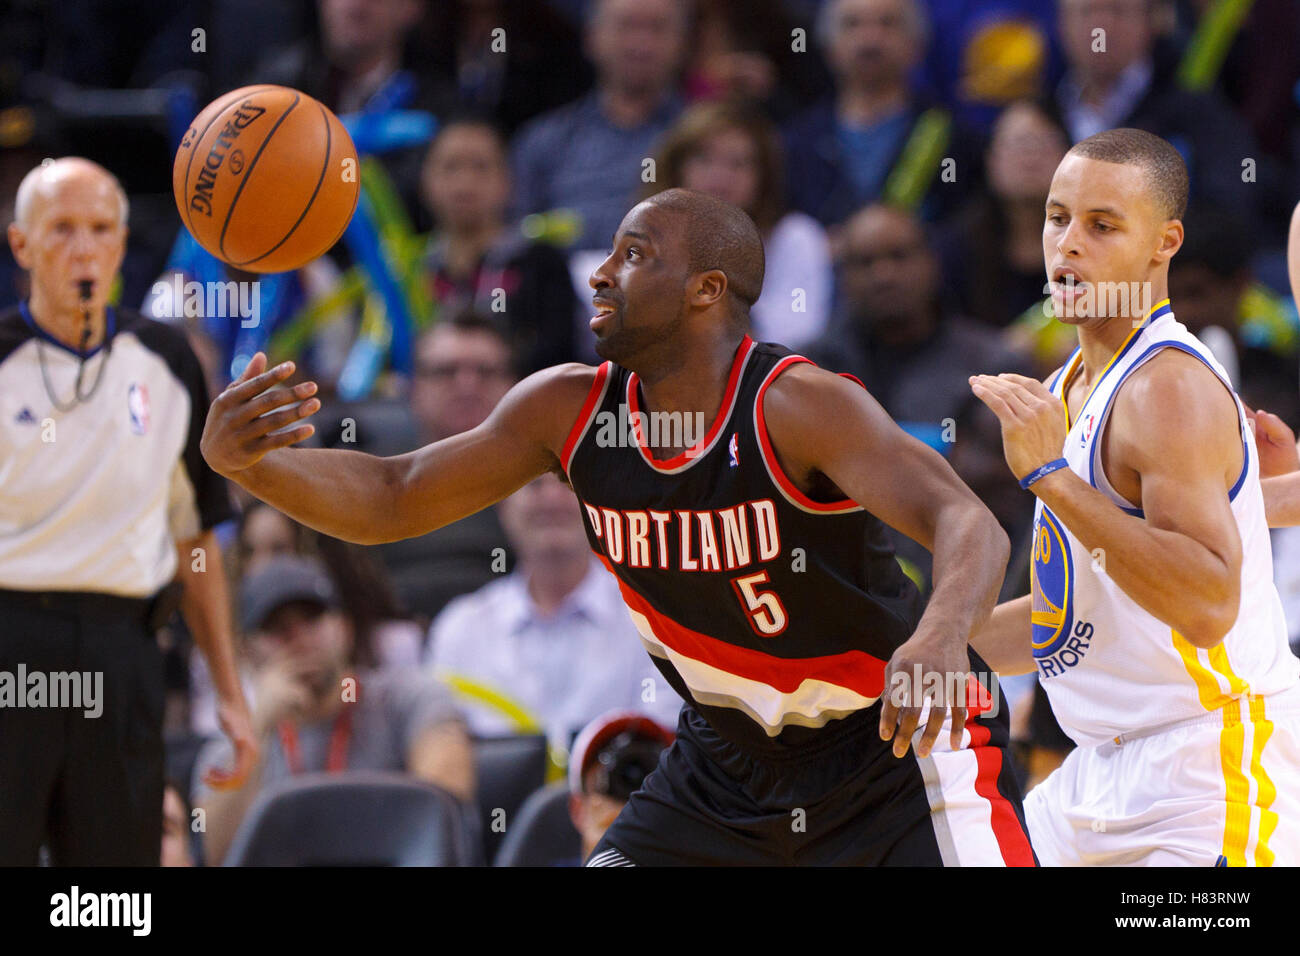 Feb 15, 2012; Oakland, CA, USA; Portland Trail Blazers point guard Raymond Felton (5) loses control of the ball in front of Golden State Warriors point guard Stephen Curry (30) during the third quarter at Oracle Arena. Portland defeated Golden State 93-91 Stock Photo